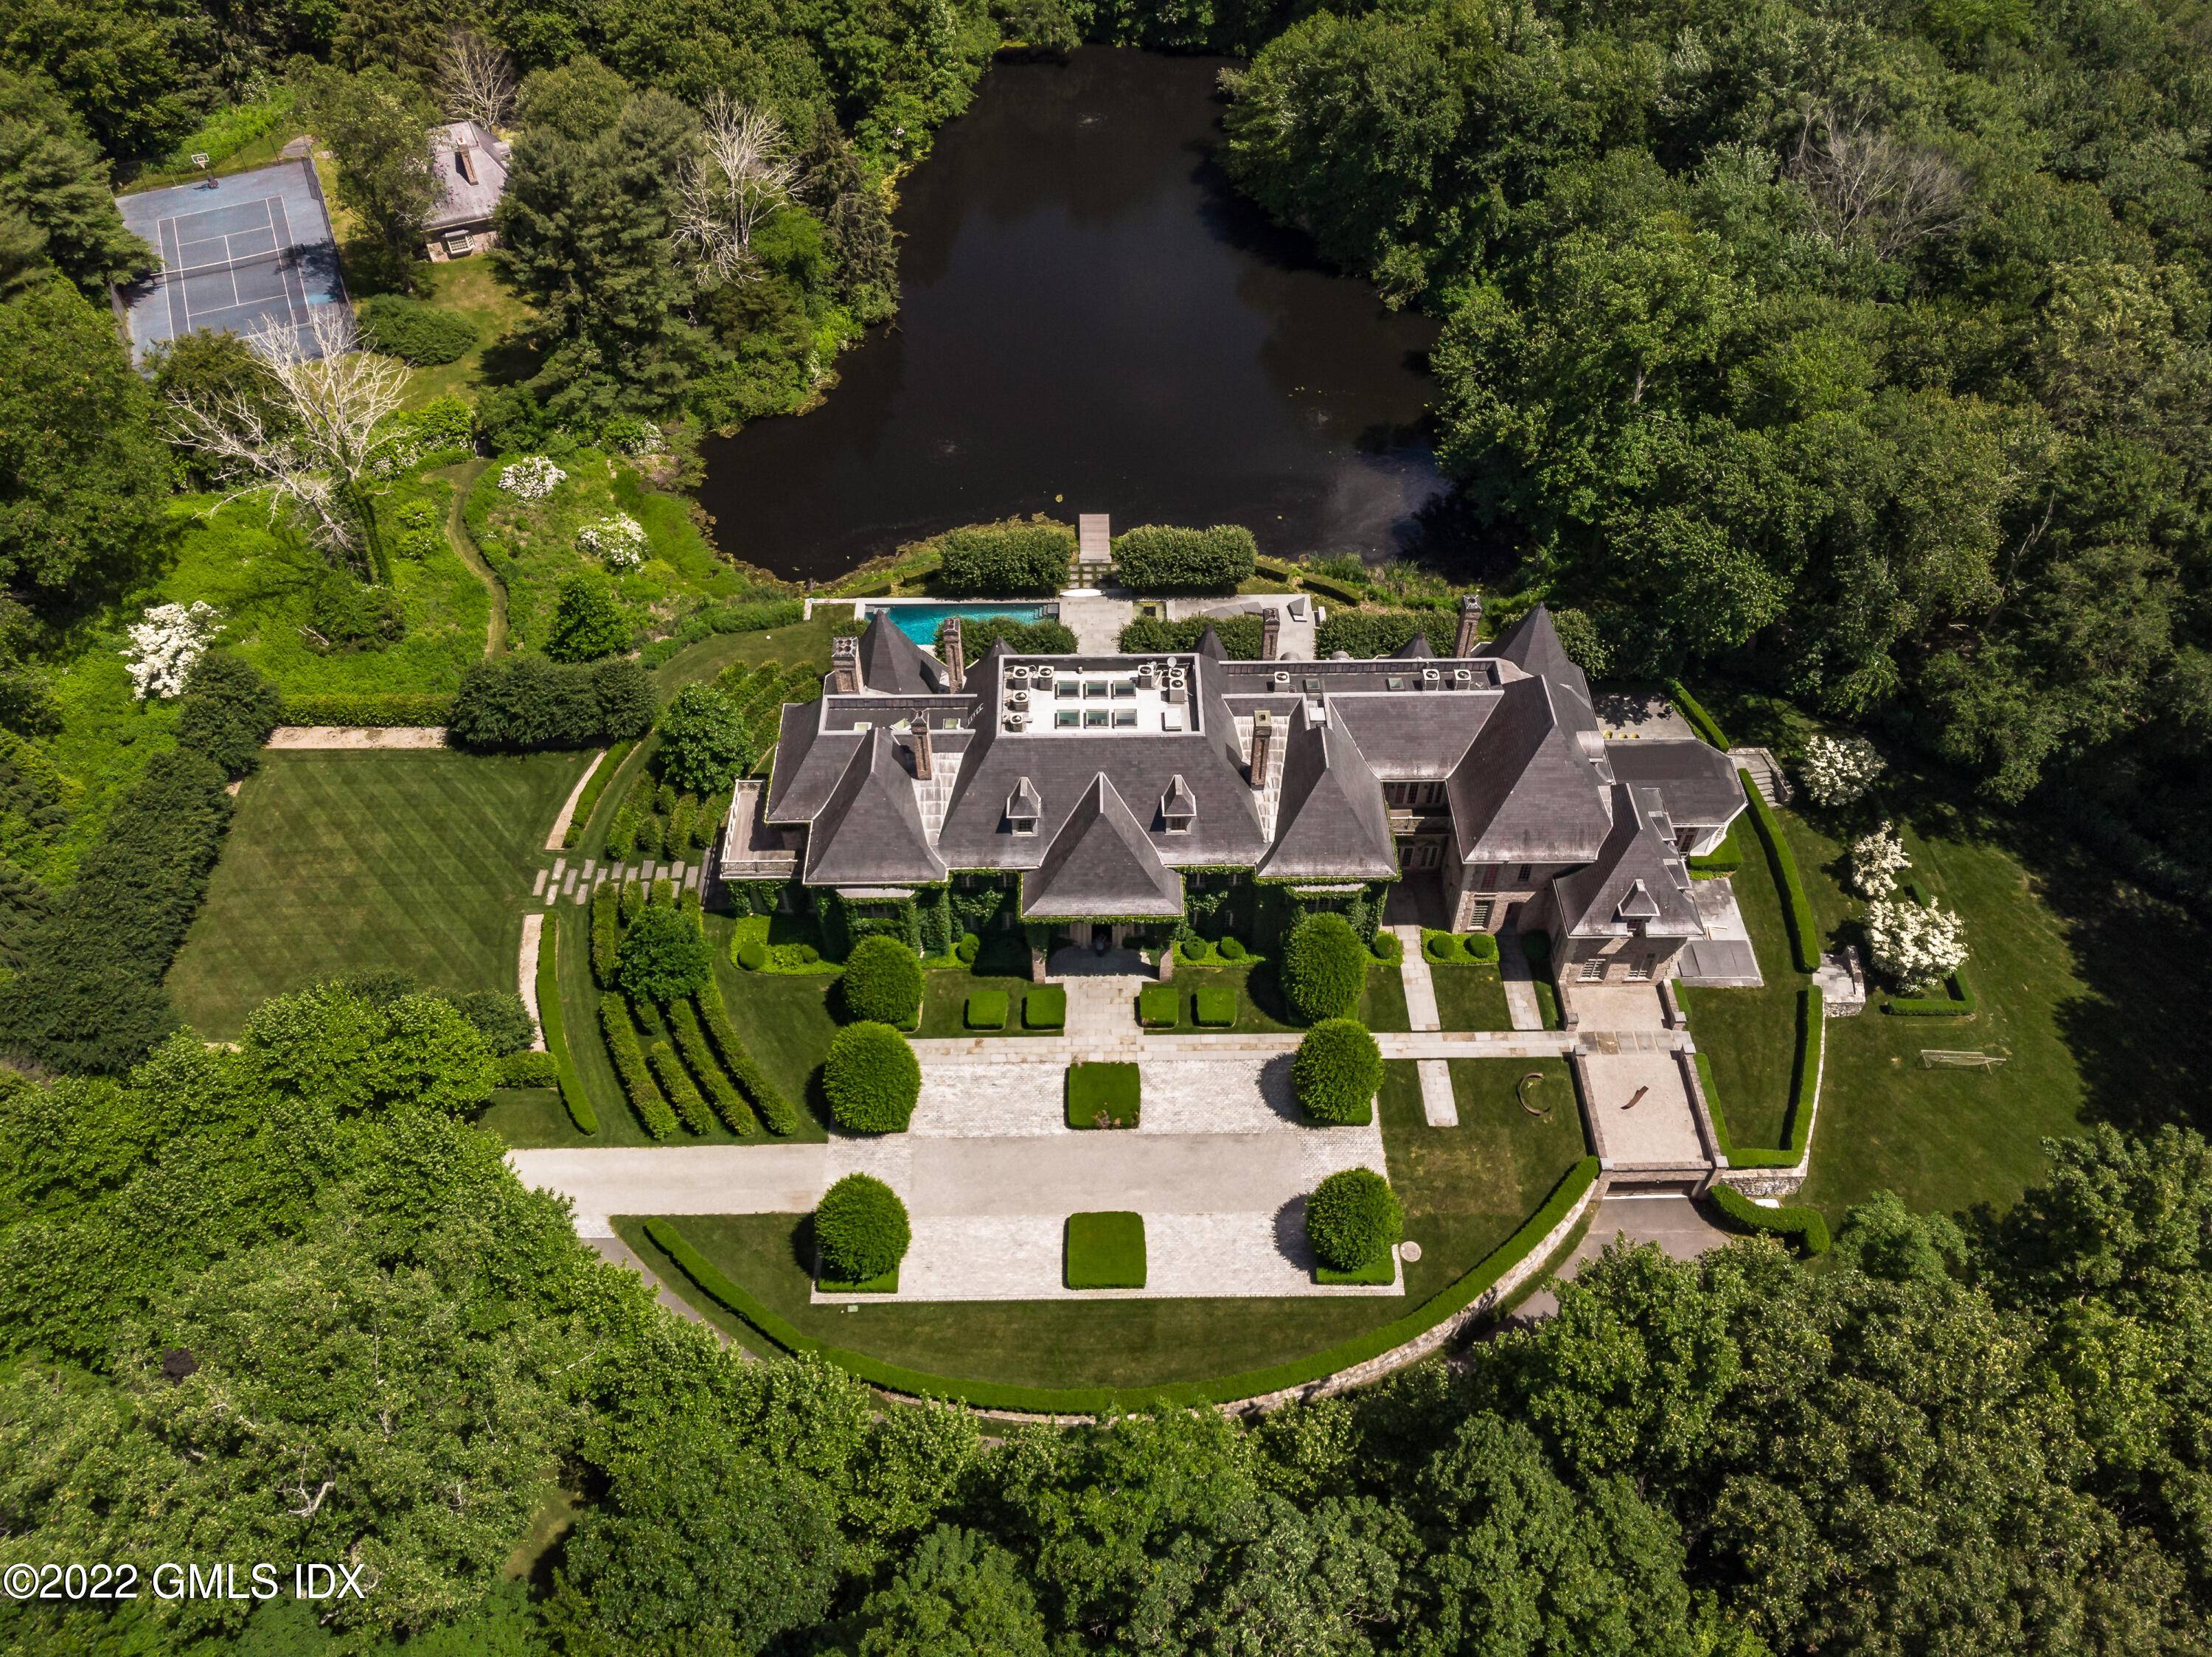 This European style Chateau offers 18, 000 plus square feet and sits on over 6 acres in one of the finest suburbs in southern Connecticut just 60 min from NYC.